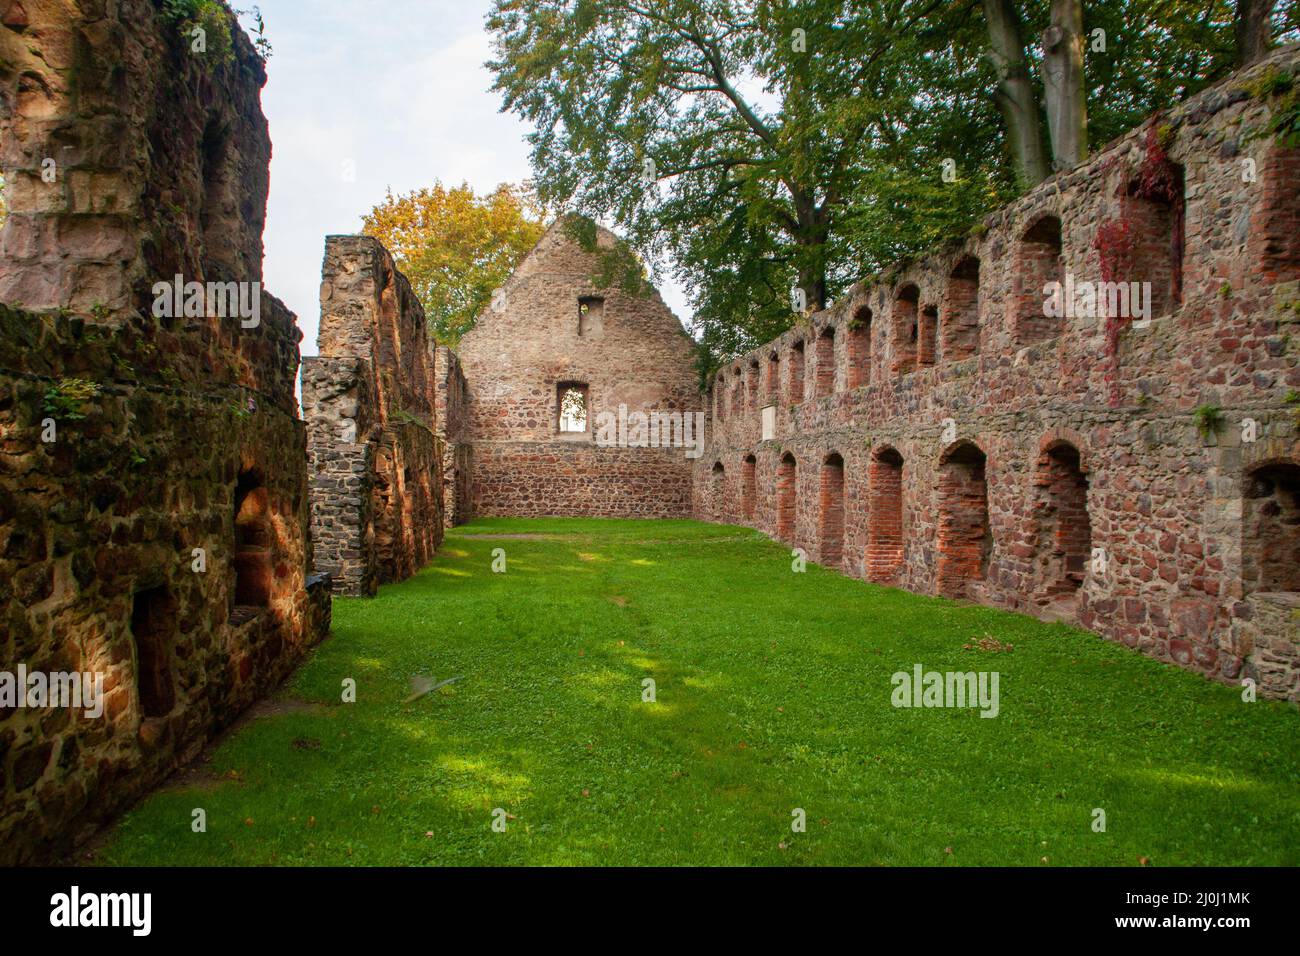 The ruins of the monastery church in Nimbschen, a former Cistercian abbey near Grimma in the Saxon district of Leipzig on the Mulde River in Germany. Stock Photo